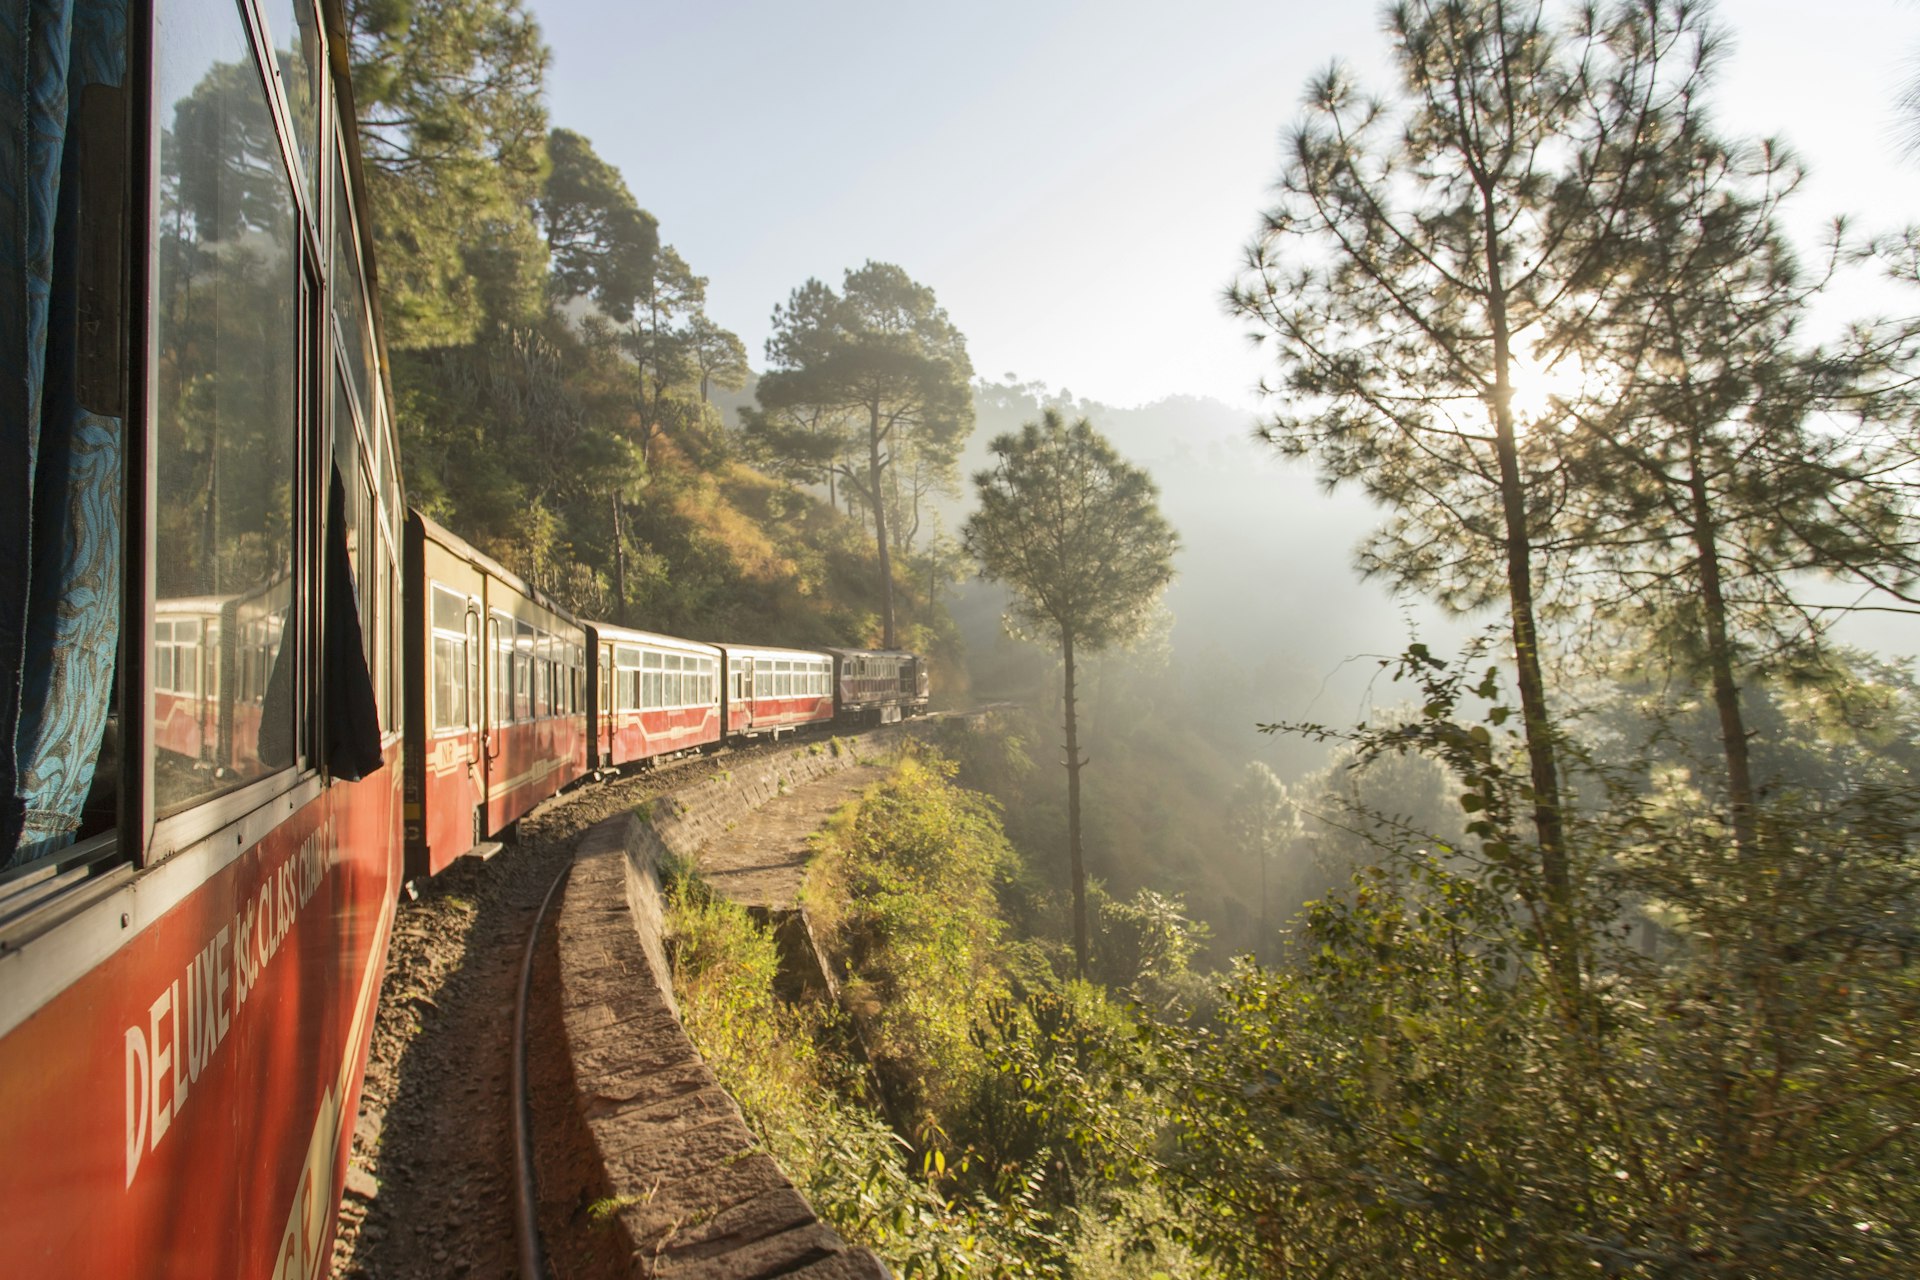 The Shivalik Deluxe Express train from Kalka to Shimla rounds a corner its journey. The train line is very scenic, hugging the side of a mountain and surrounded by forest.